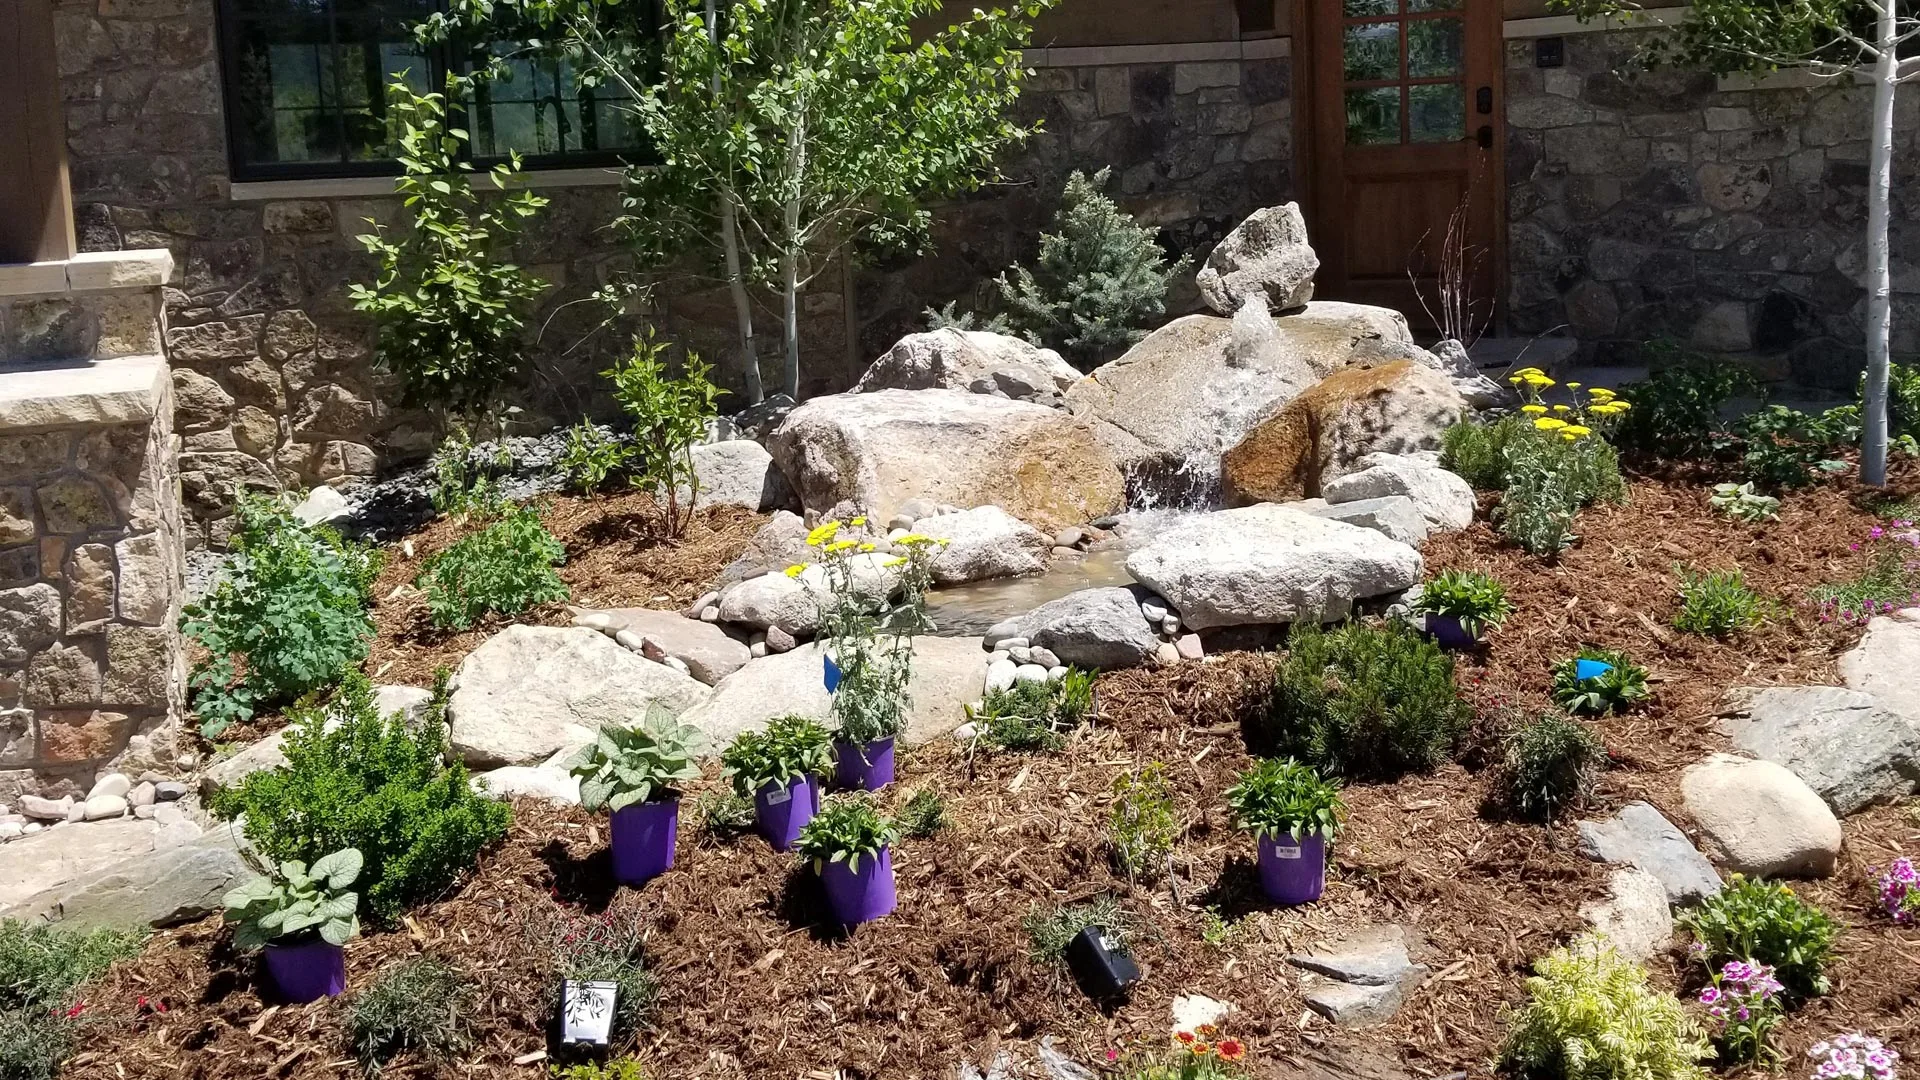 Preparing a landscaping bed for plantings in front of a residential home in Winter Park, CO.